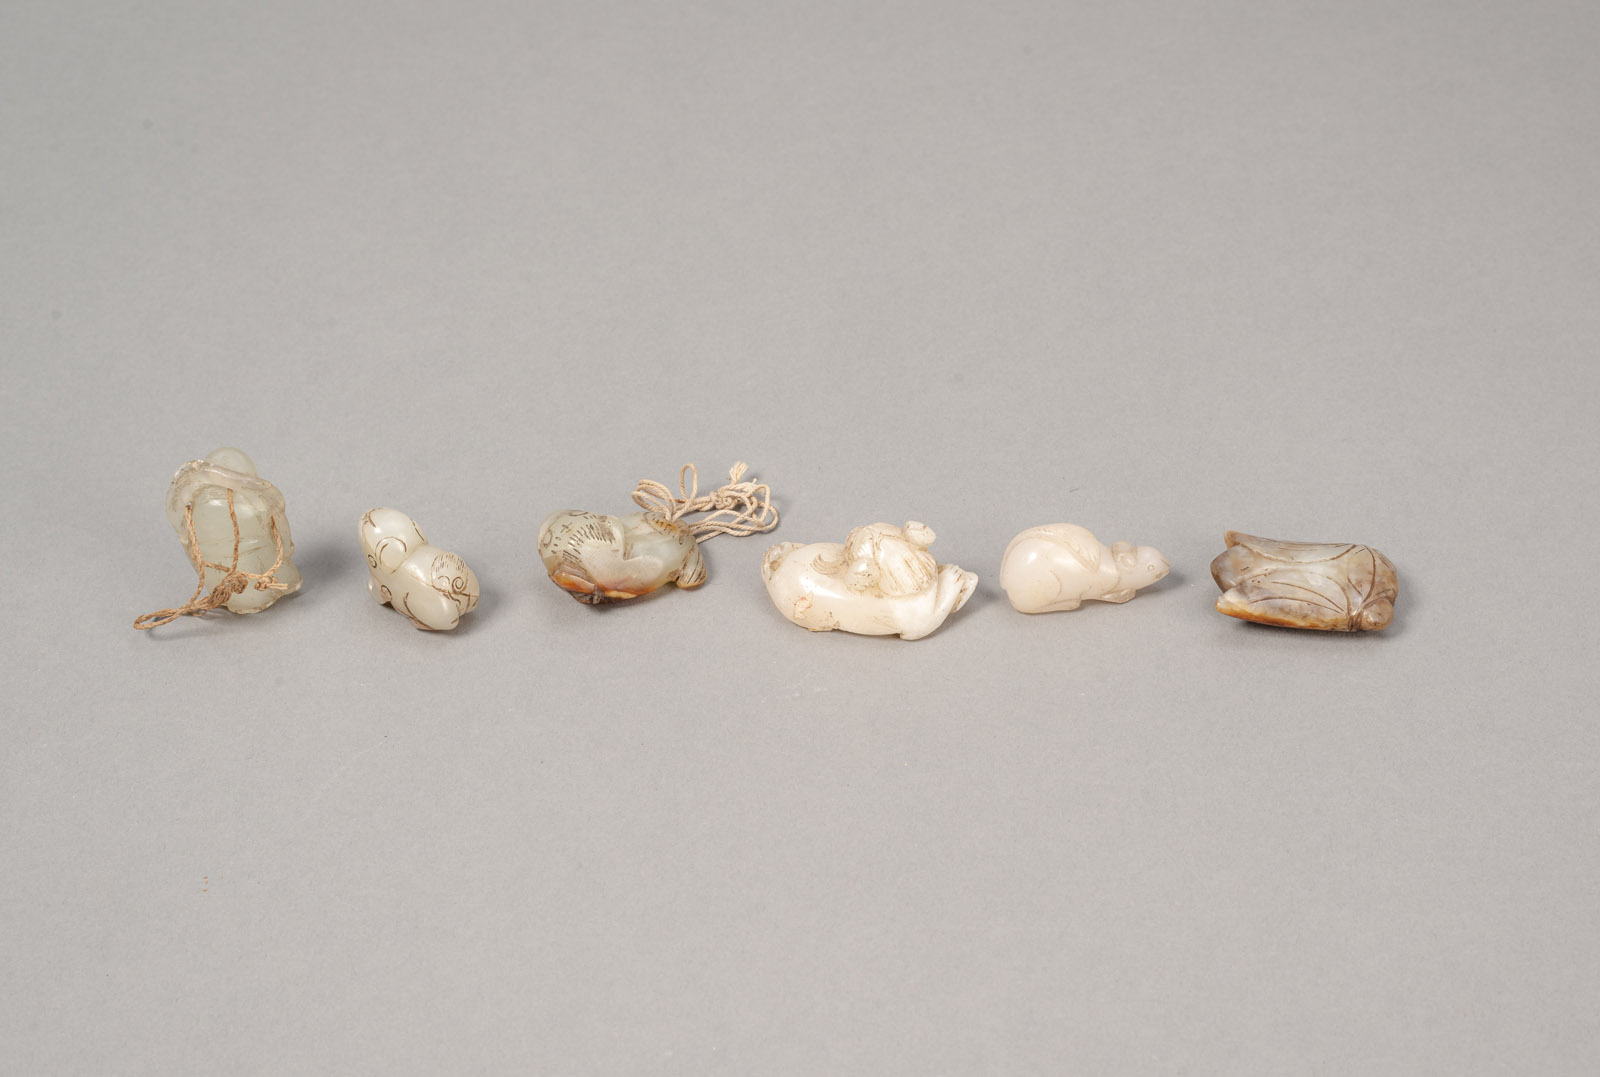 SIX SMALL JADE CARVINGS OF ANIMALS AND OTHERS - Image 2 of 3